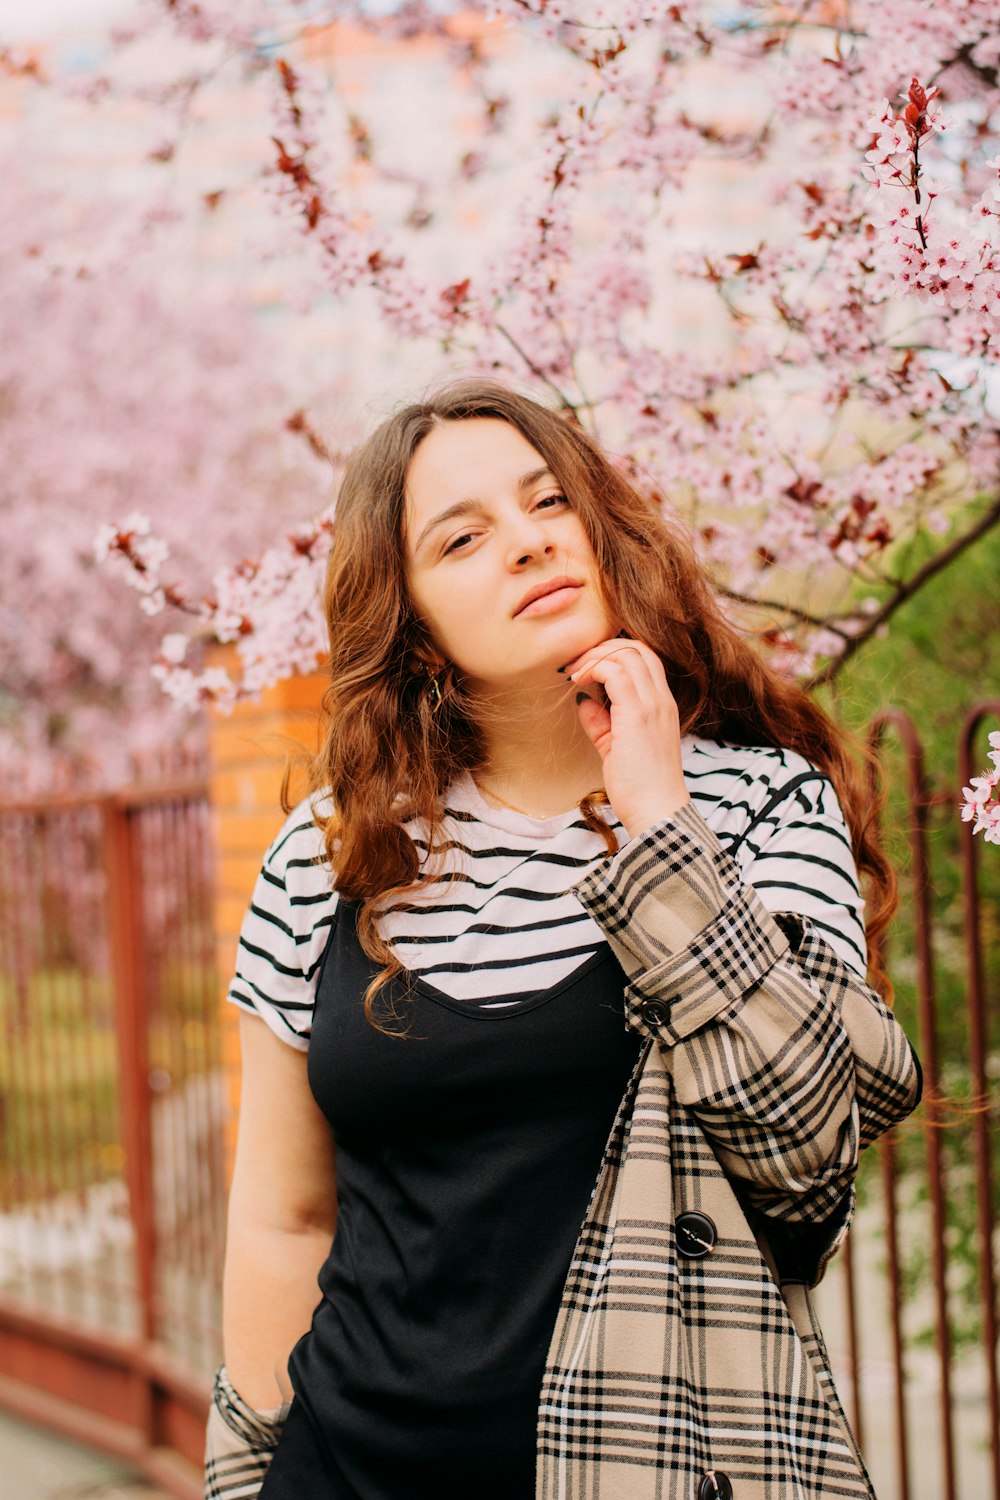 woman in black and white striped shirt standing near pink flowers during daytime